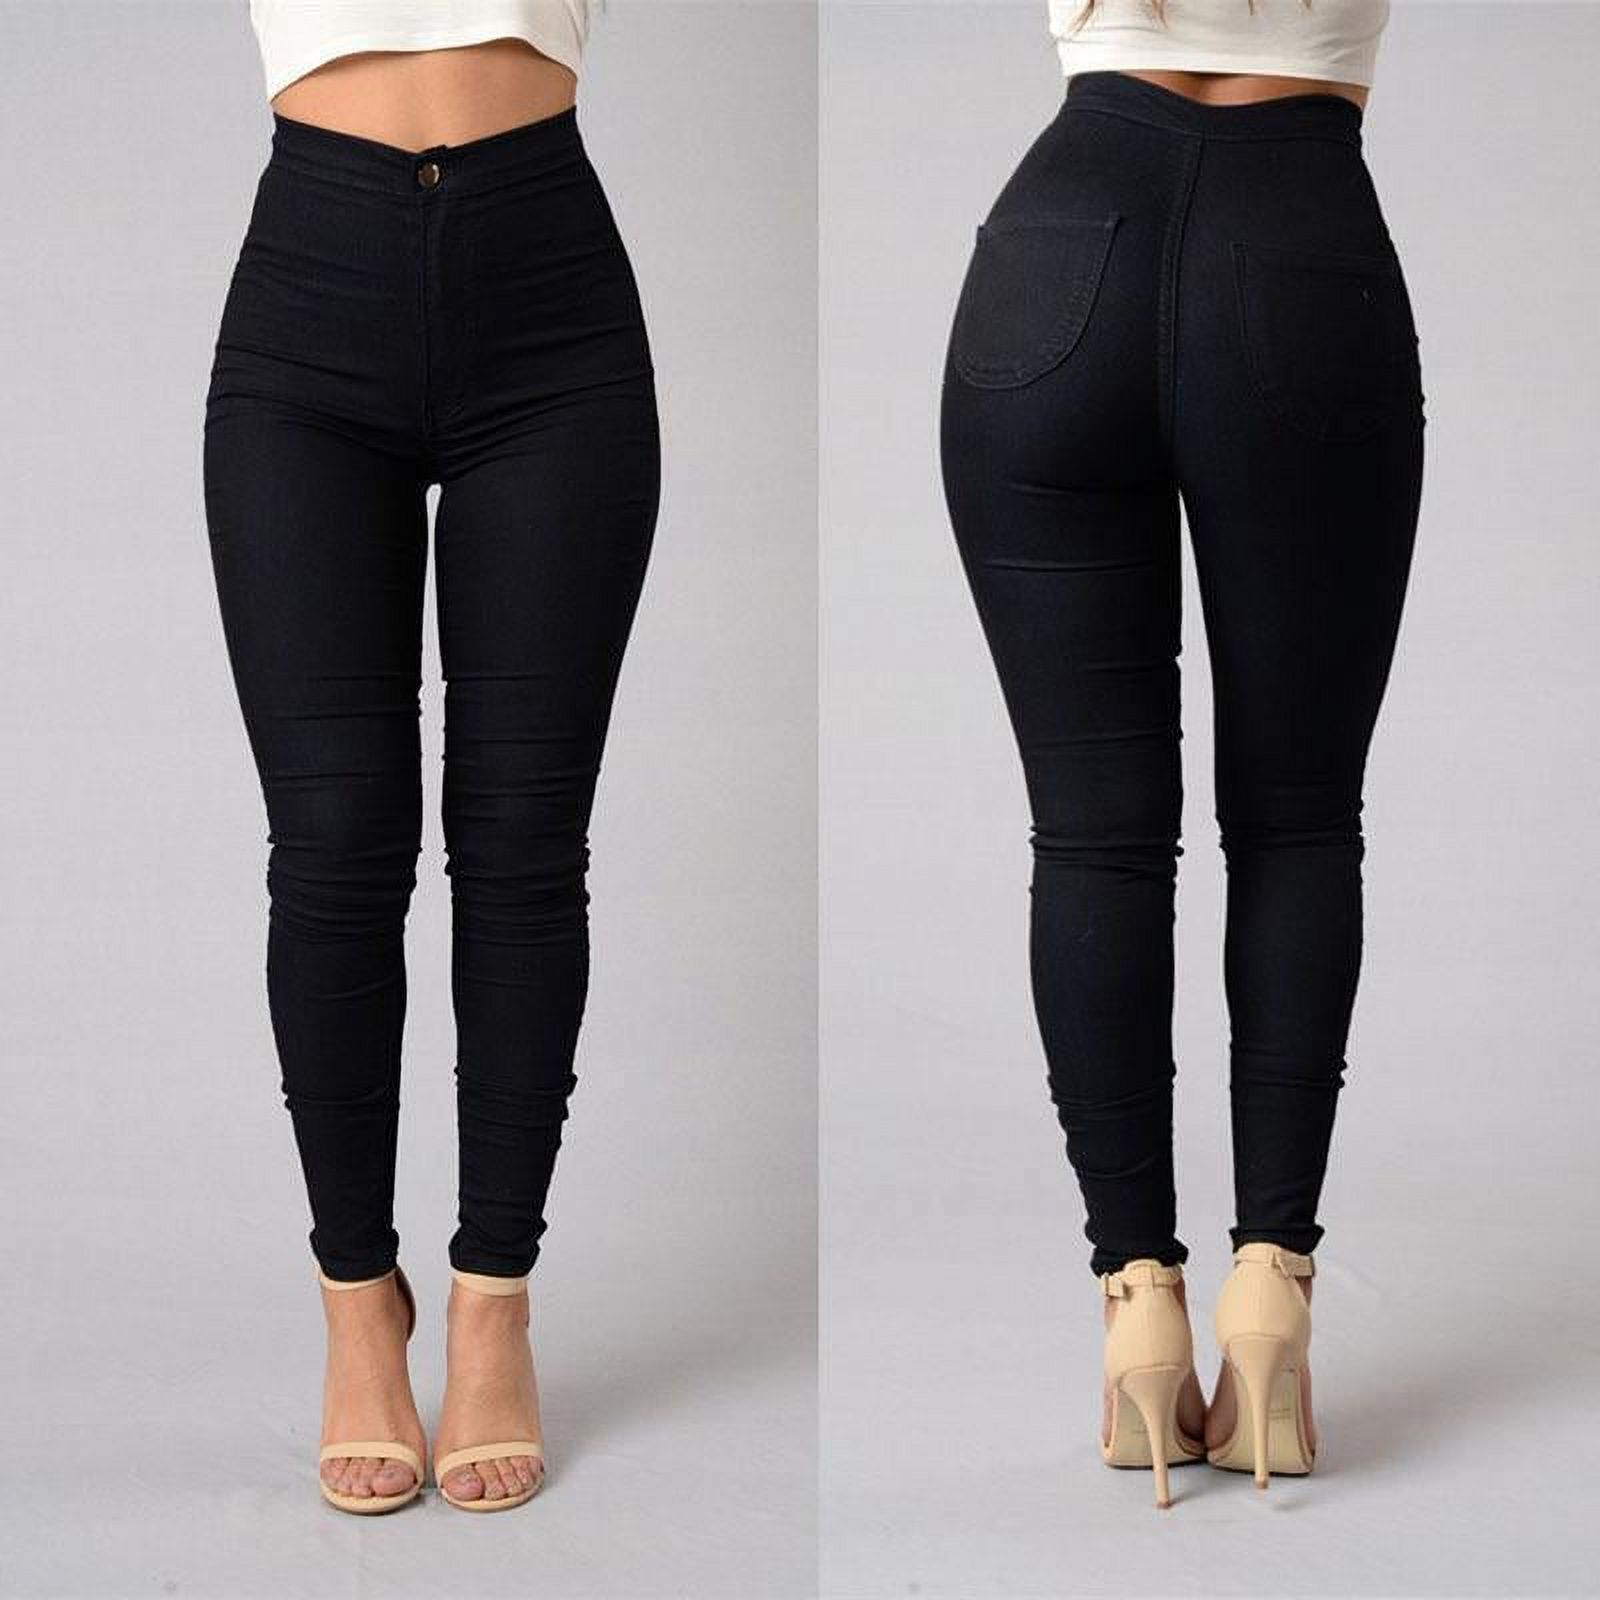 Women Skinny High Waist Jeans Stretch Denim Jeggings Pants Pencil Trousers - image 1 of 2